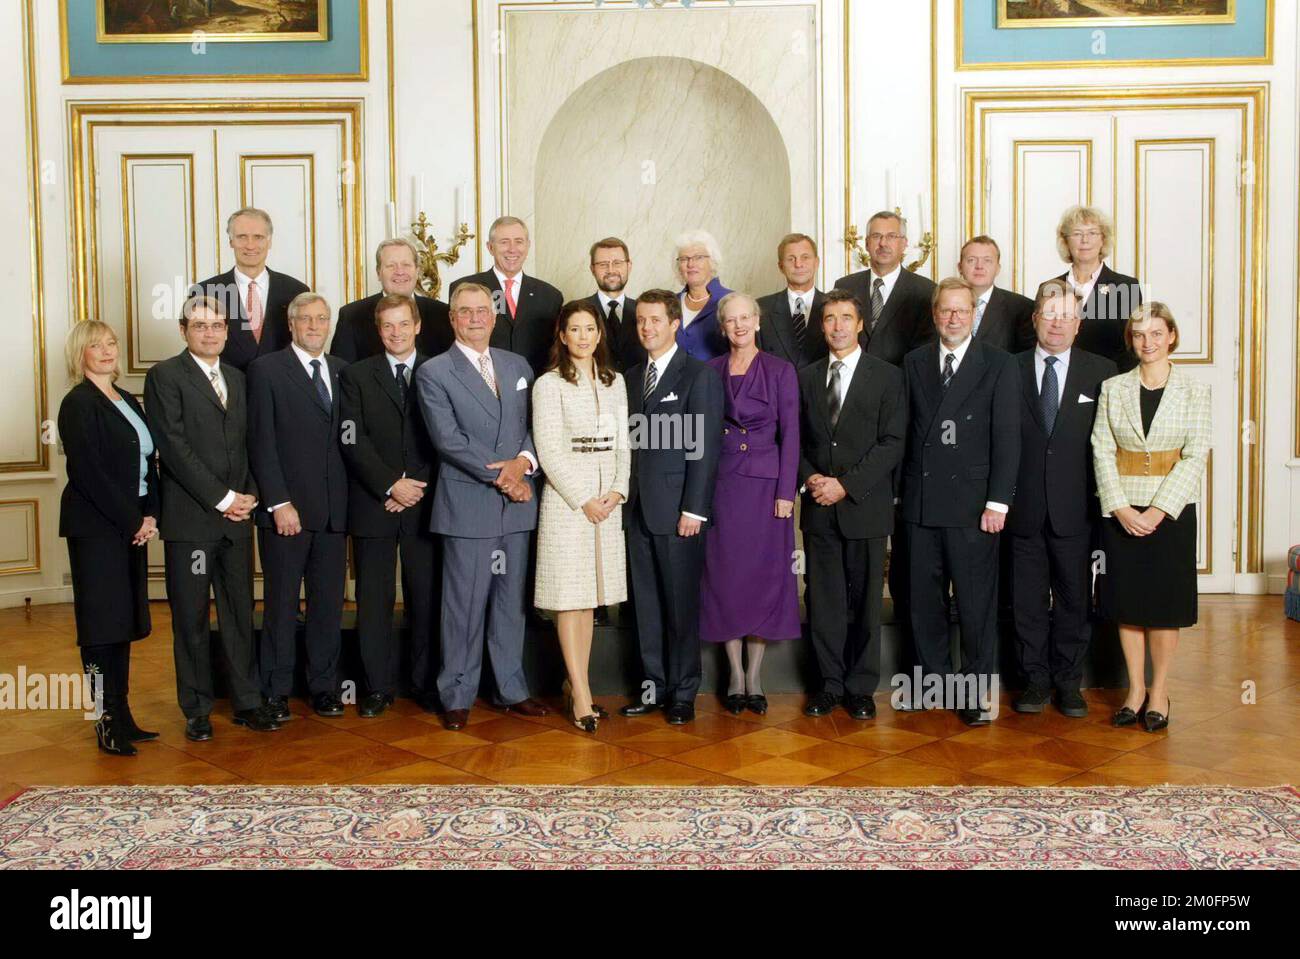 After the meeting of Council of State, the ministers gathered in the Banqueting Hall for the official picture of the royal engagement between HRH crown prince Frederik and Mary Donaldson.  The picture includes Queen Margrethe, Prince Henrik, Frederik and Mary (centre). Stock Photo